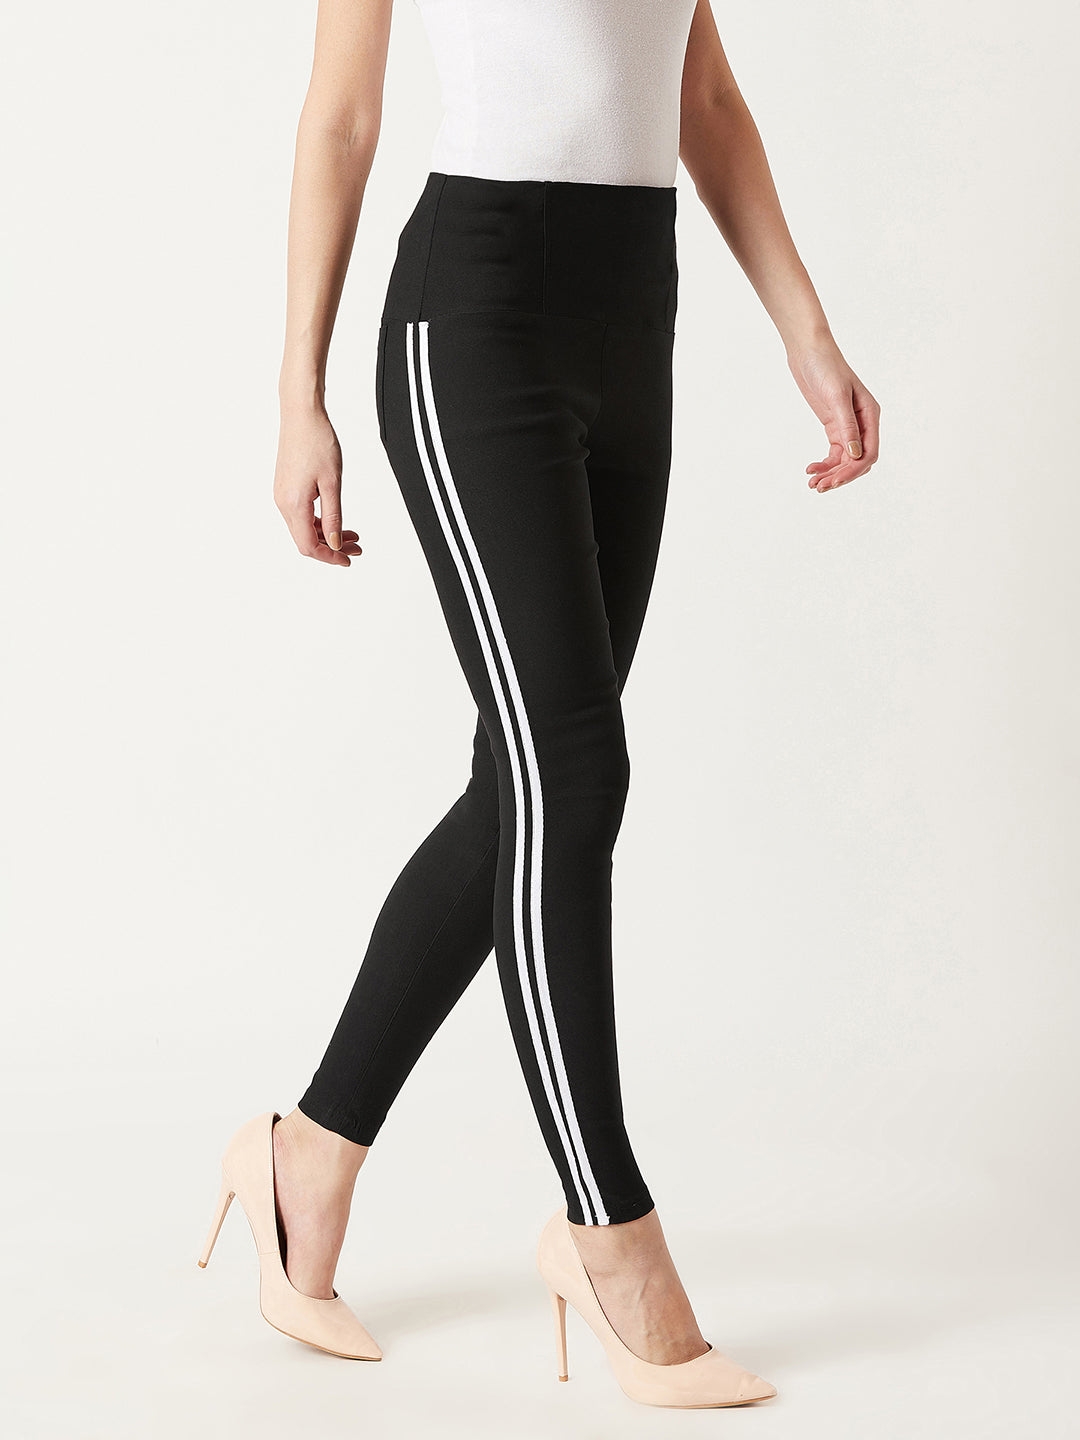 MISS CHASE | Black Solid High Waist Skinny Regular Length Black and White Twill Tape Detailing Jeggings